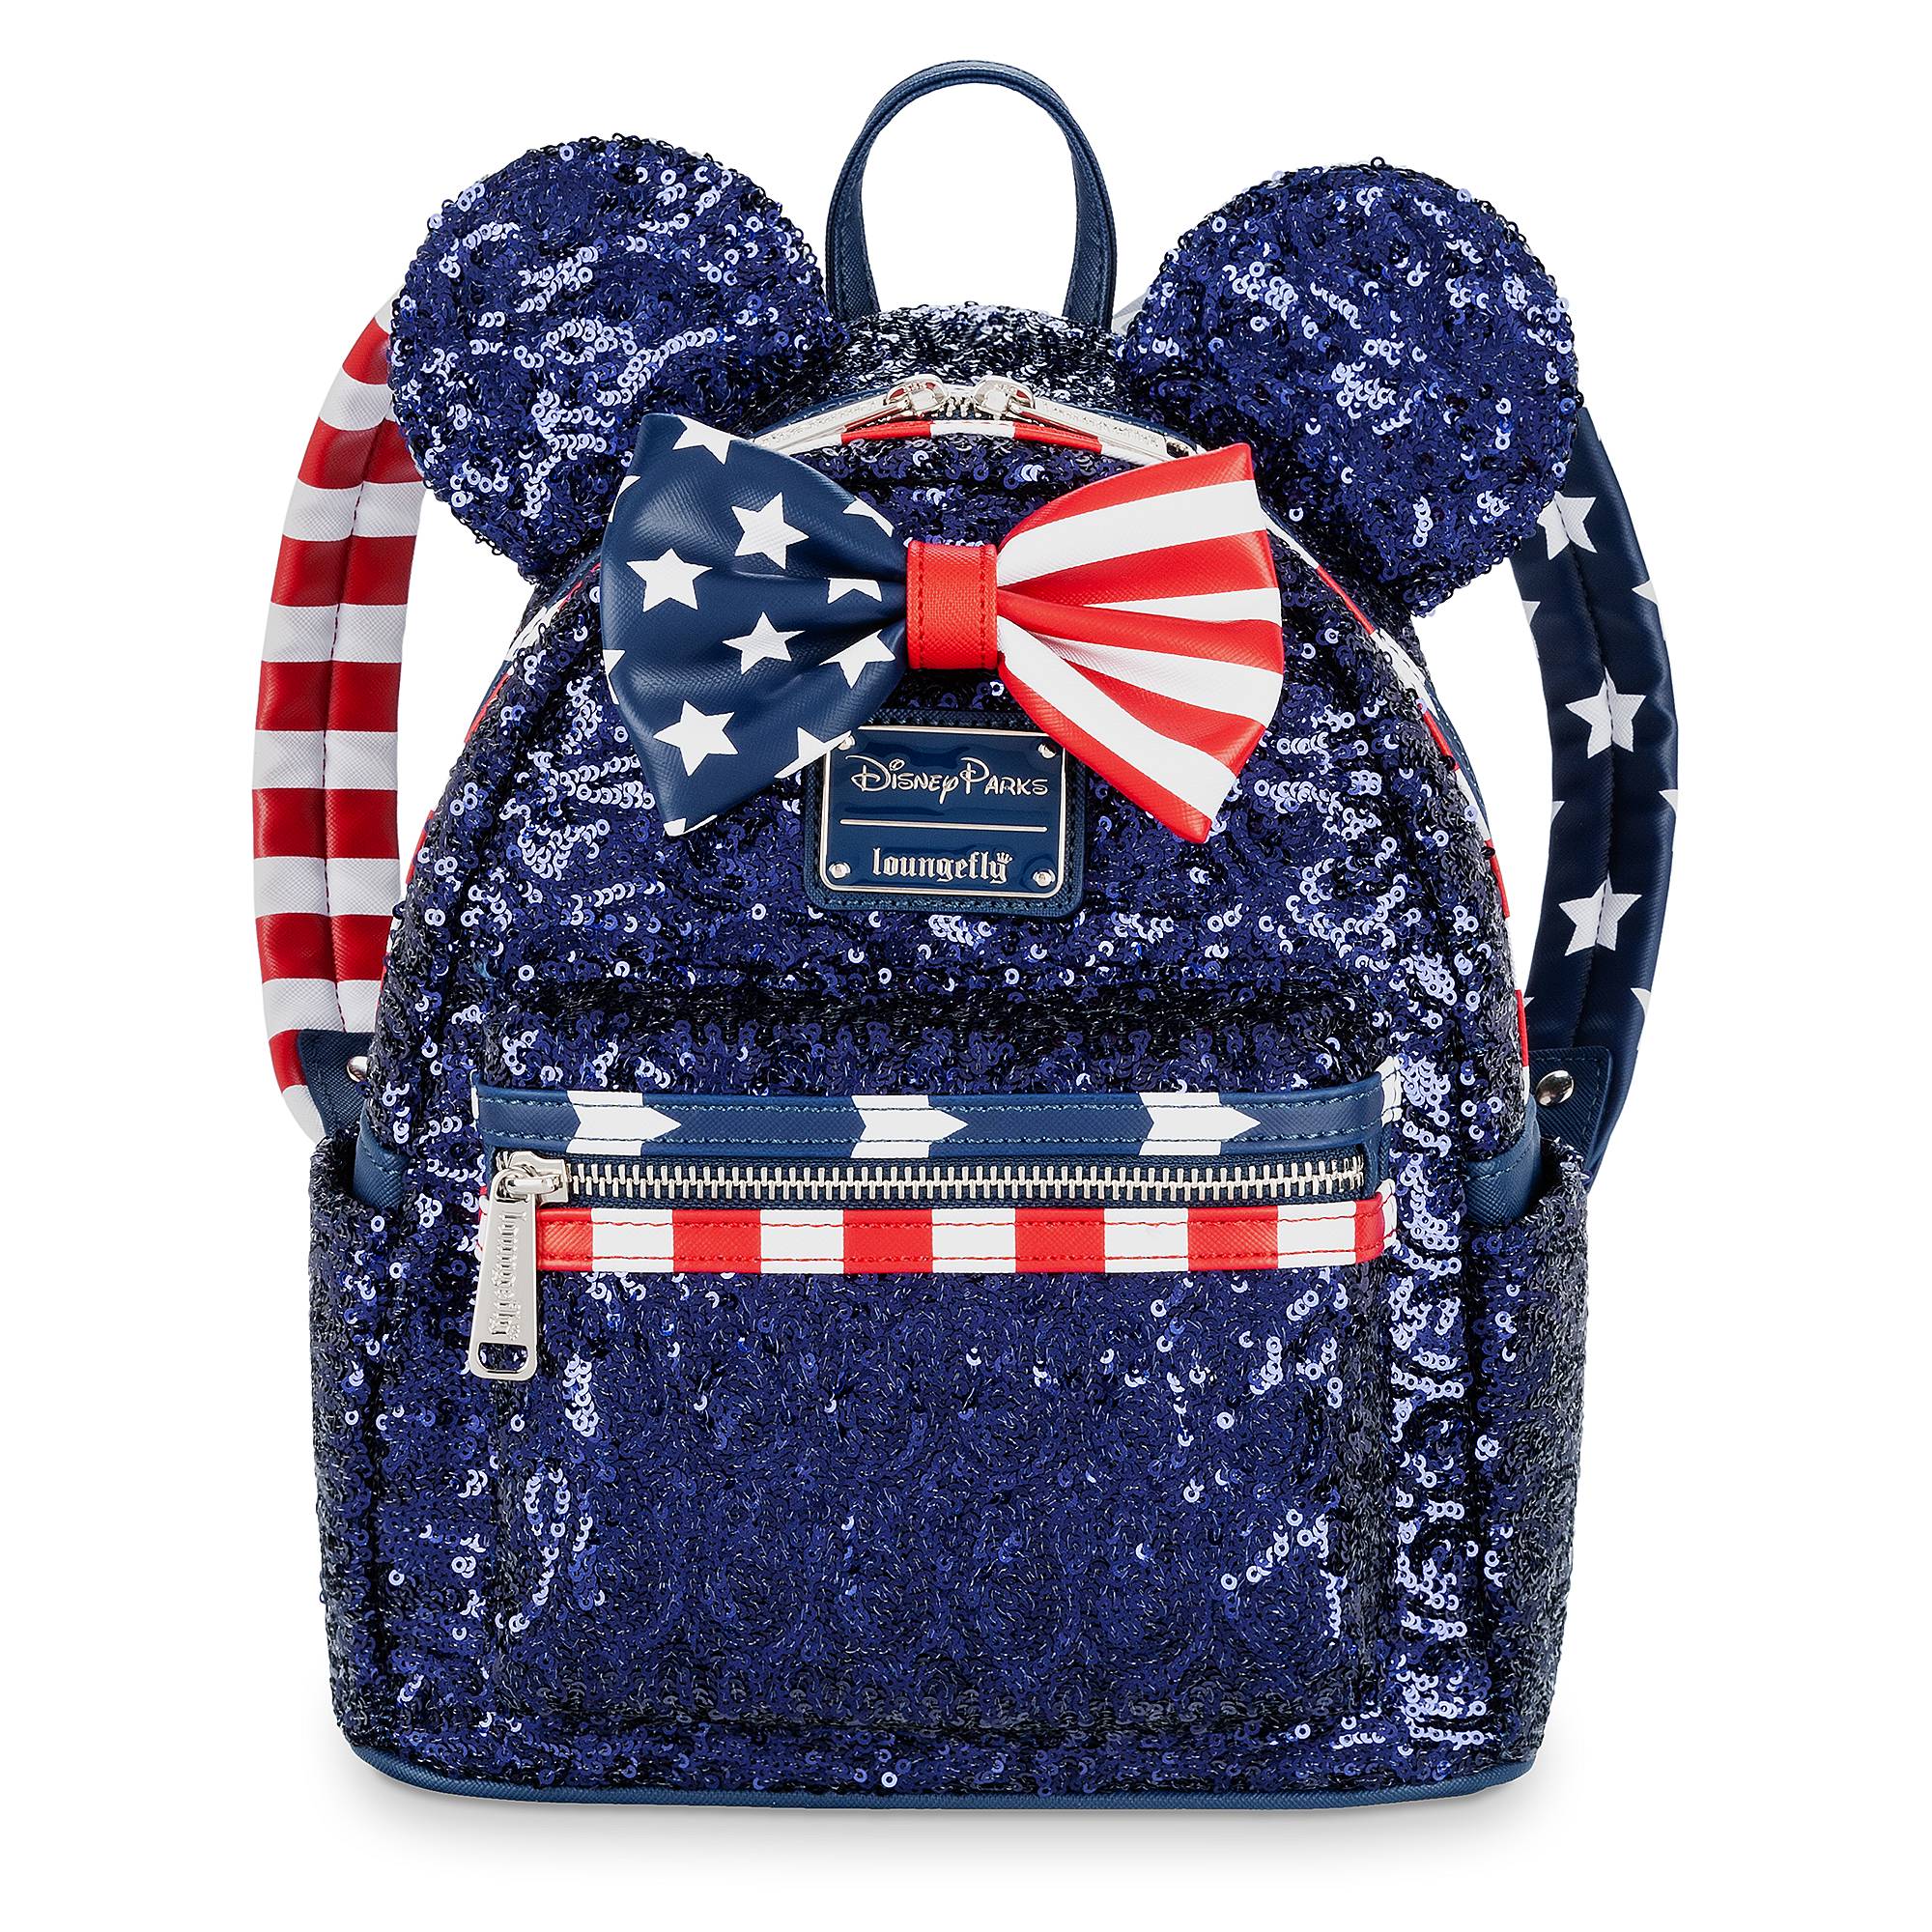 Disney Parks Minnie Mouse Sequined Stars And Stripes Mini Backpack New With Tag - image 1 of 3